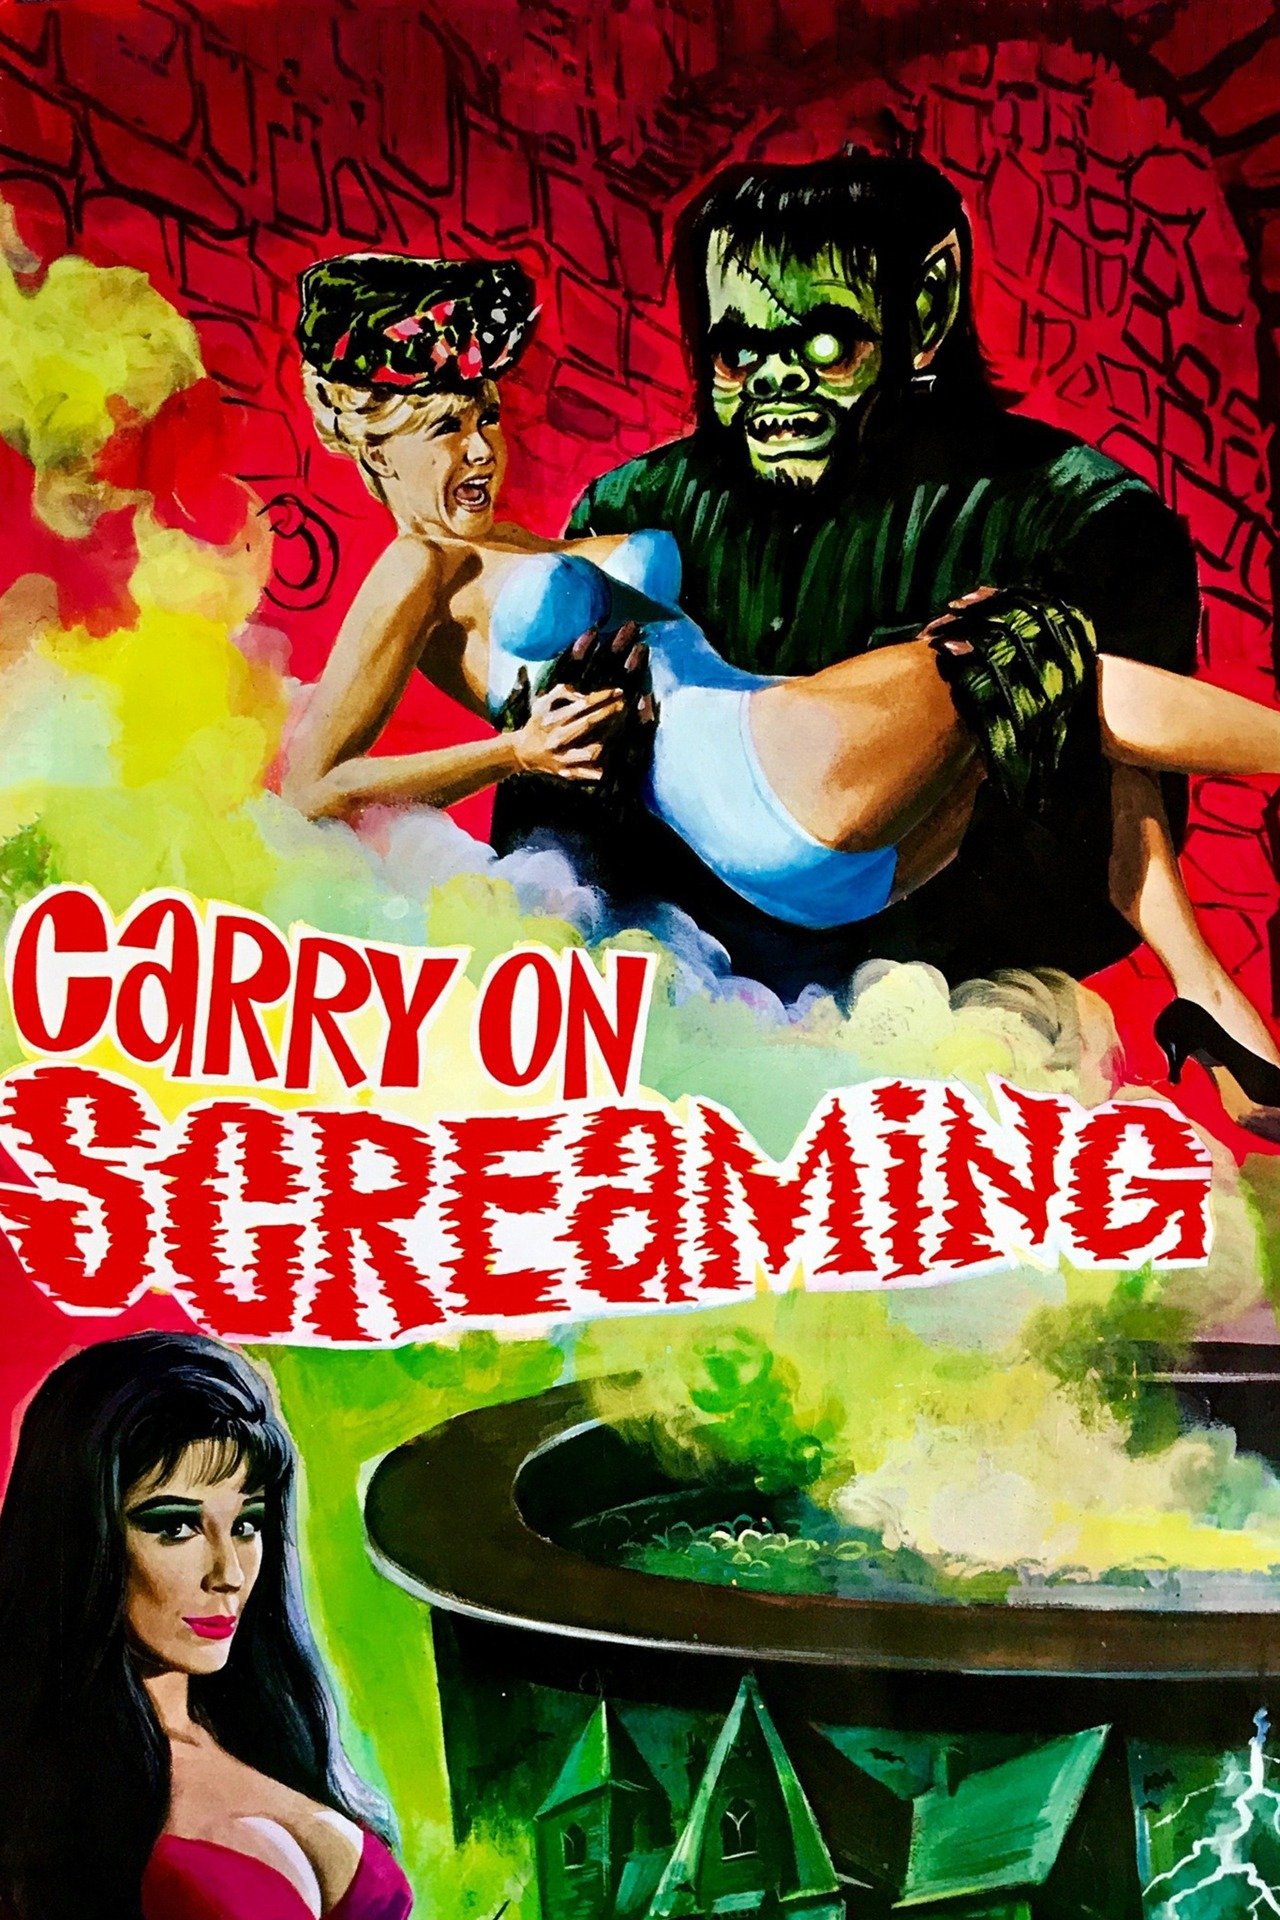 Carry on screaming! 1966